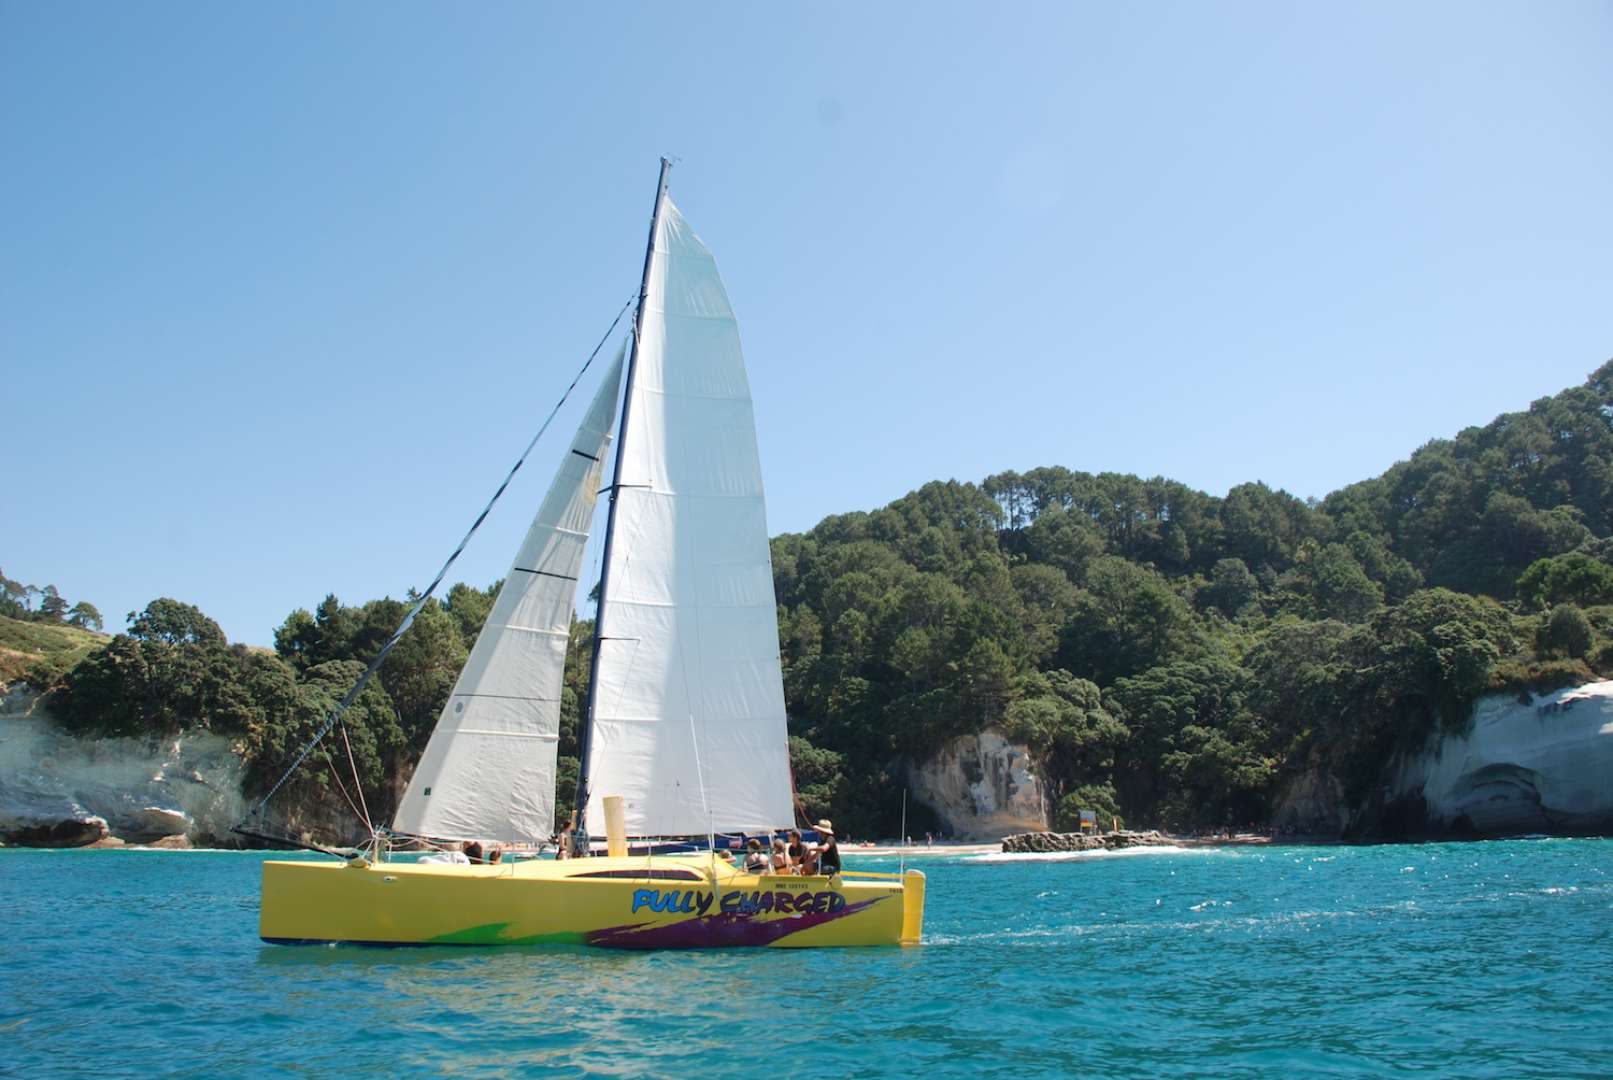 Our catamaran in the Coromandel is comfortable, fast and stable